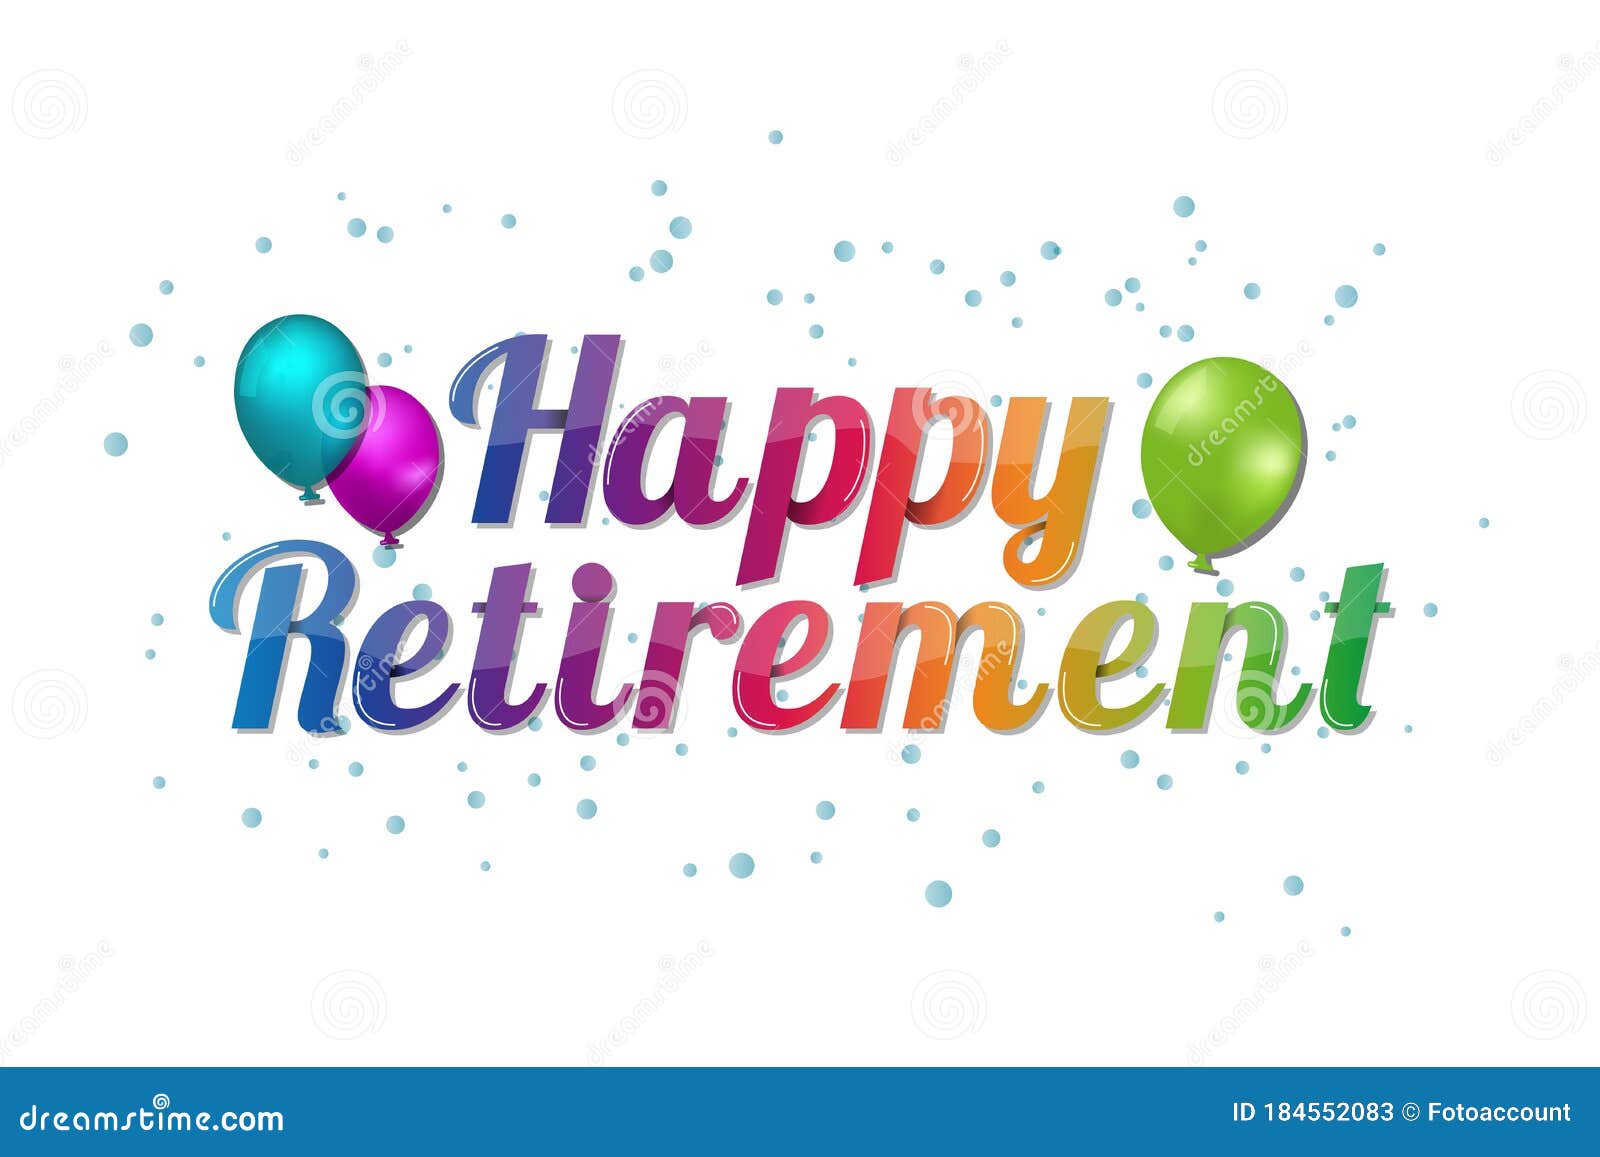 Happy Retirement Banner - Colorful Vector Illustration with Ball ...